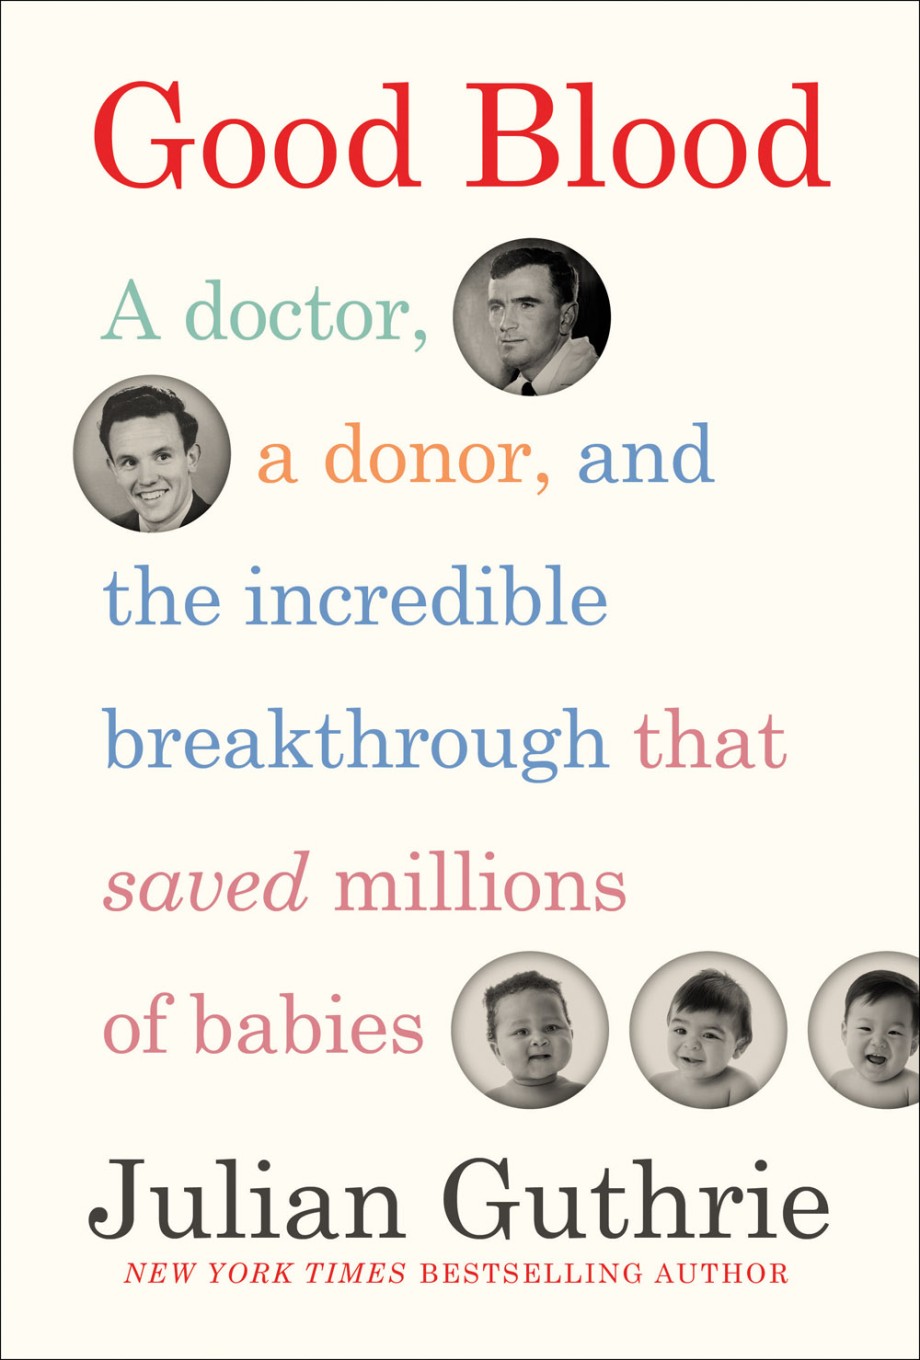 Good Blood A Doctor, a Donor, and the Incredible Breakthrough that Saved Millions of Babies